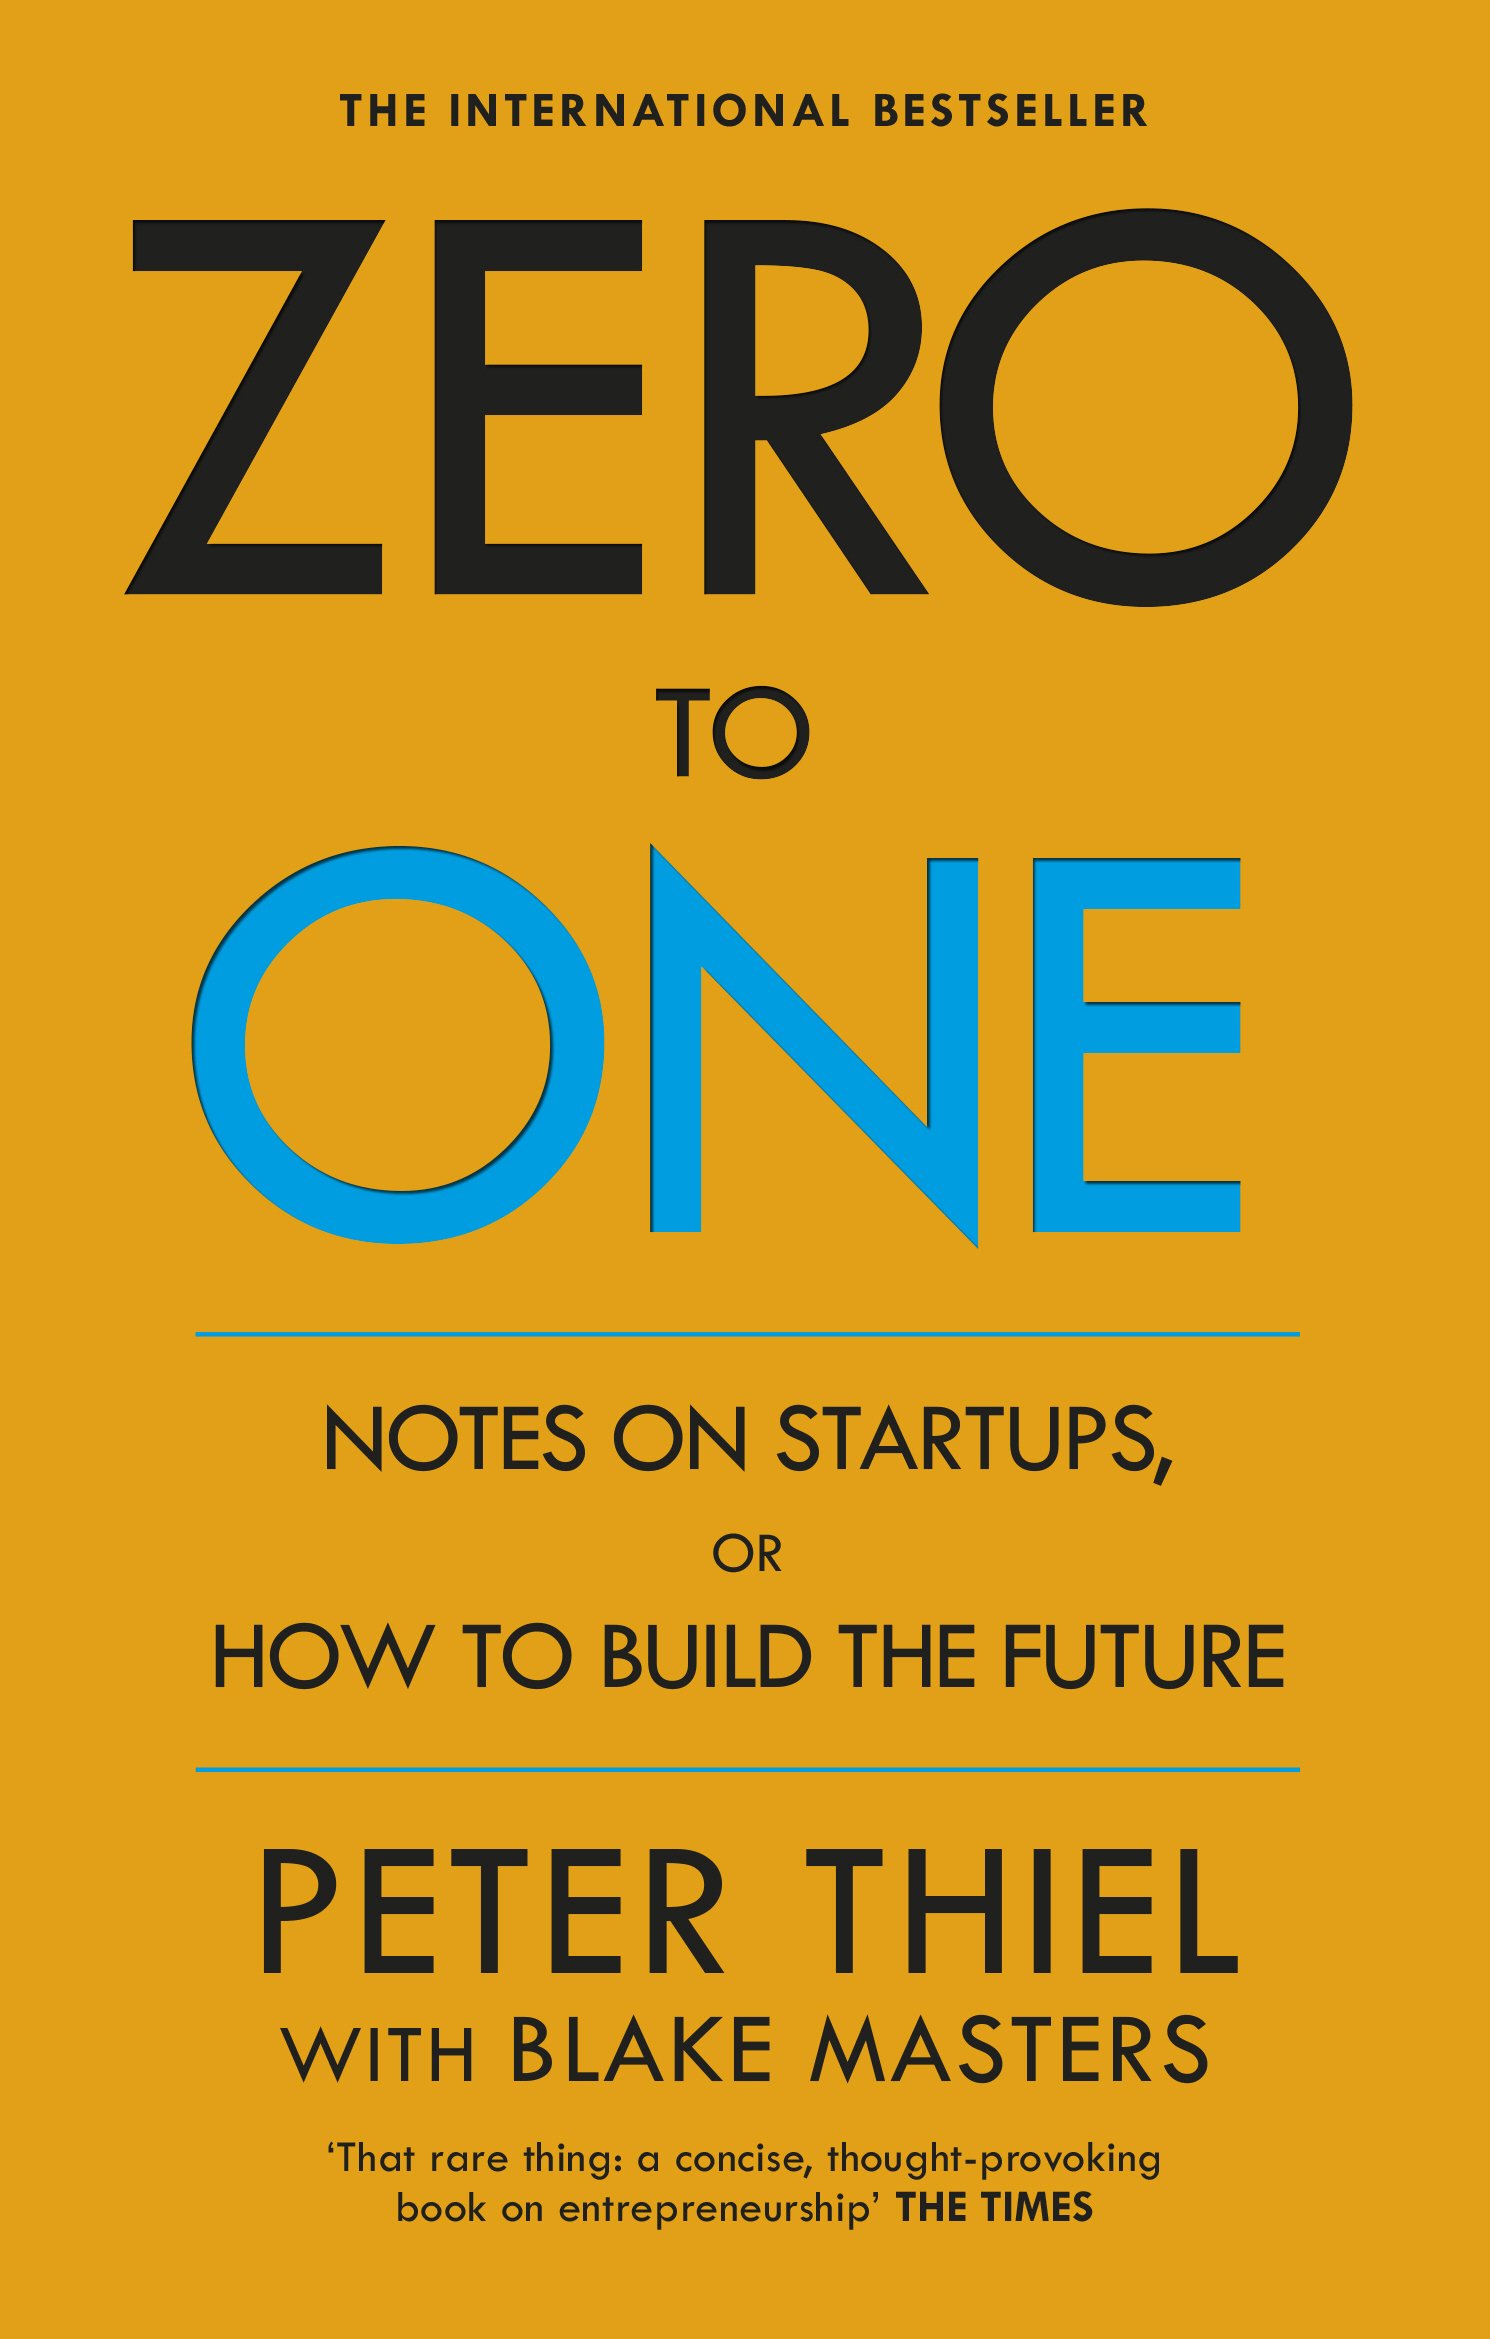 Image of the book: Zero to one by Peter Thiel and Black Masters